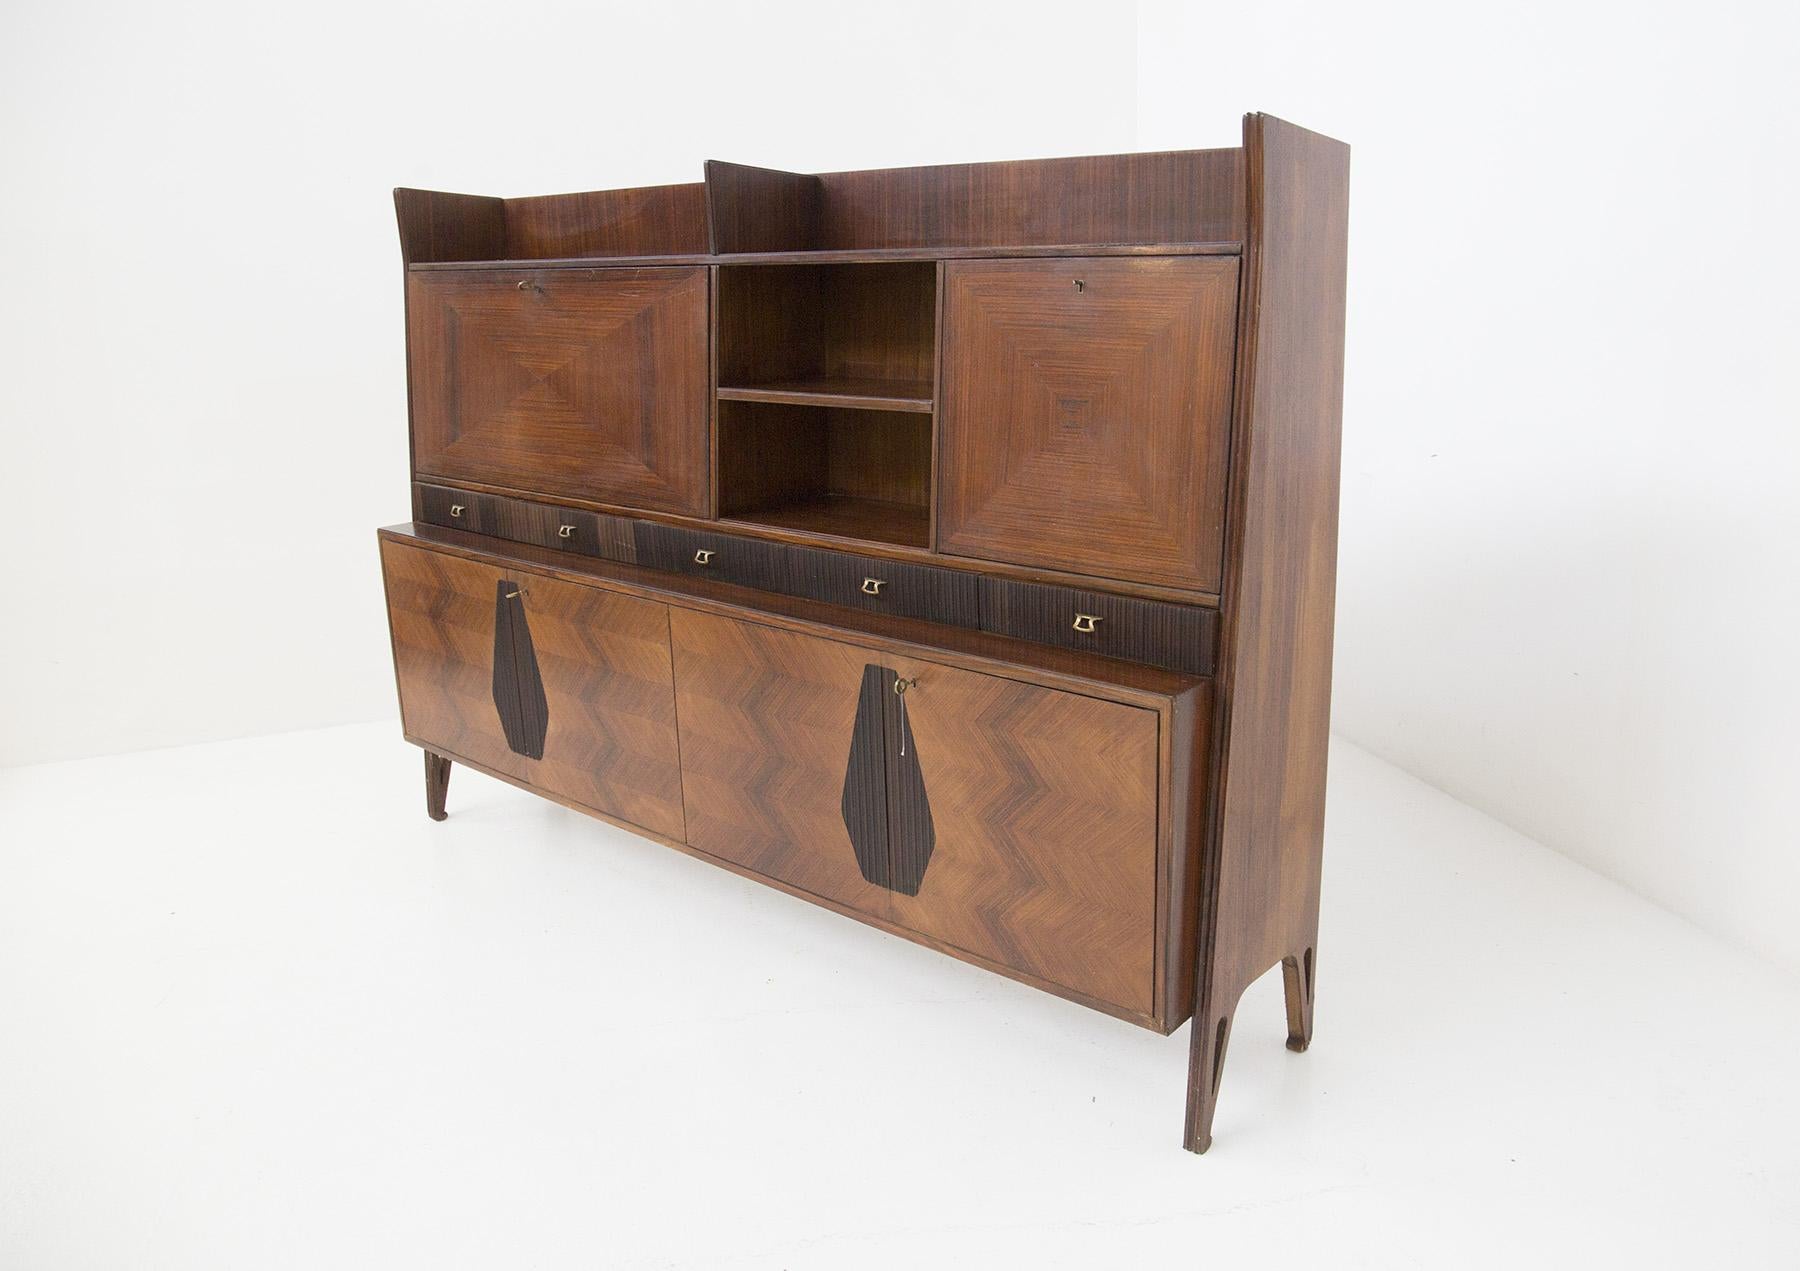 Beautiful, high-quality living room furniture produced by Permanente Mobili of Cantù. The 1950s cabinet features excellent fine woodwork. Elegant grissinato inserts and extraordinary geometric shapes carved from the wood grain. The handles and keys